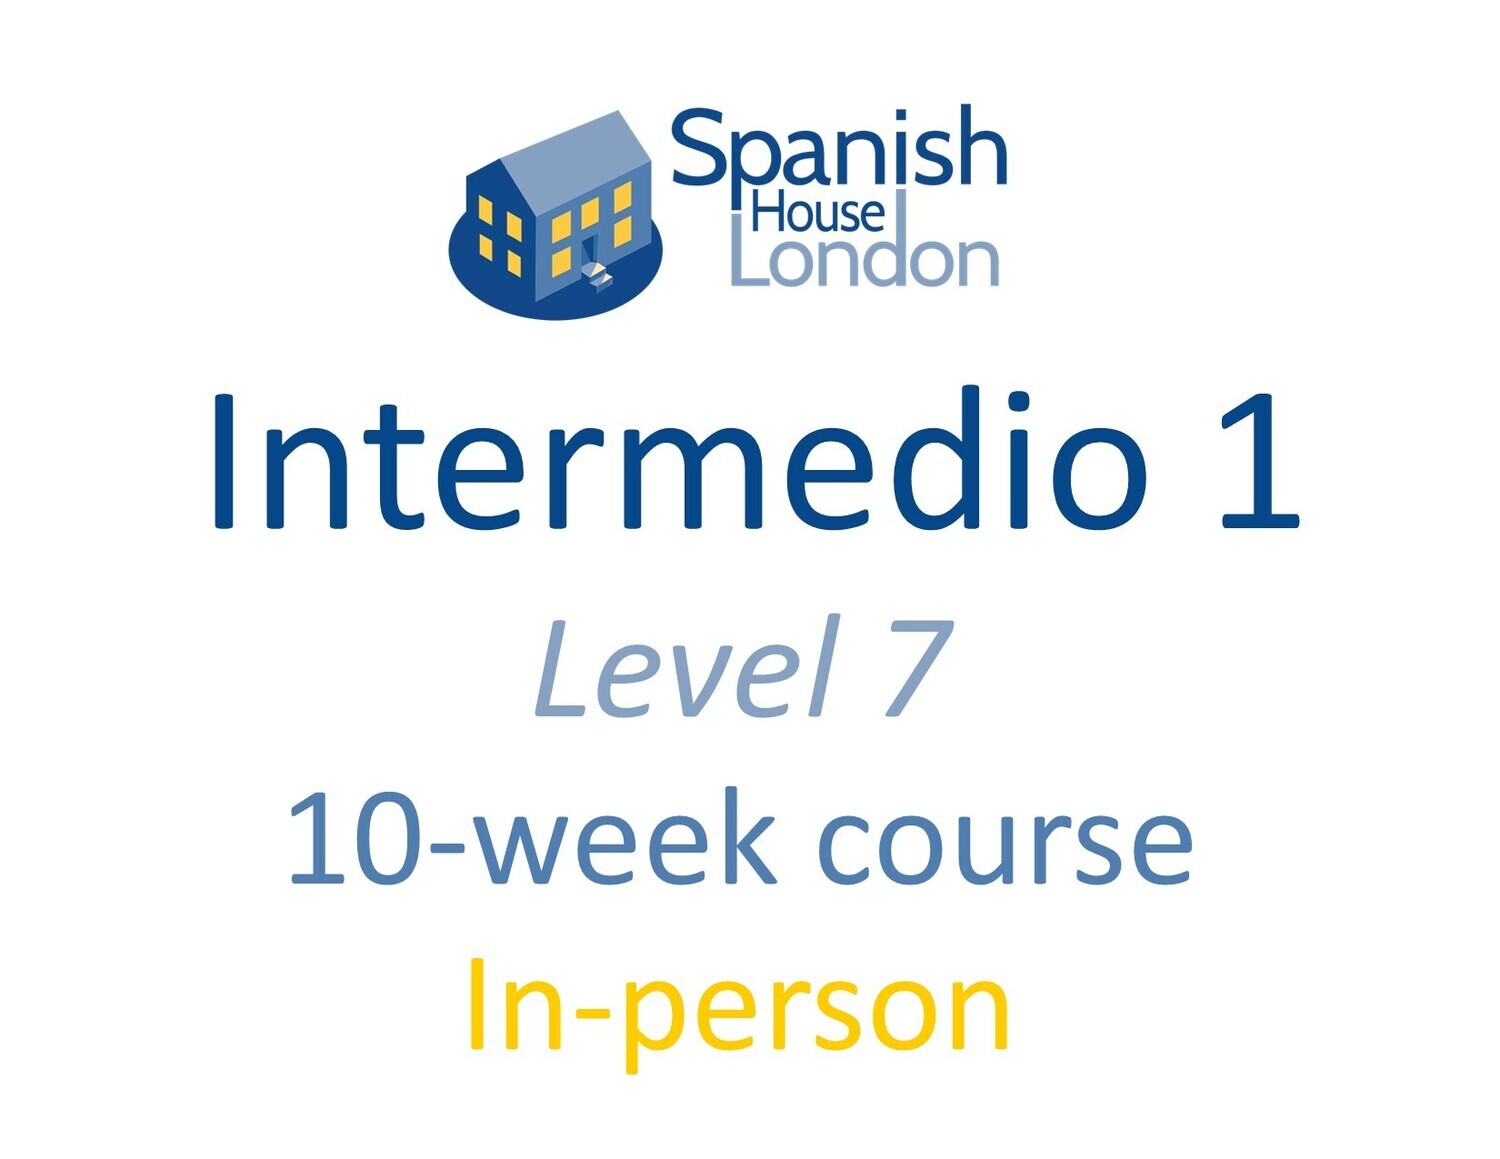 Intermedio 1 Course starting on 17th August at 6pm in Clapham North